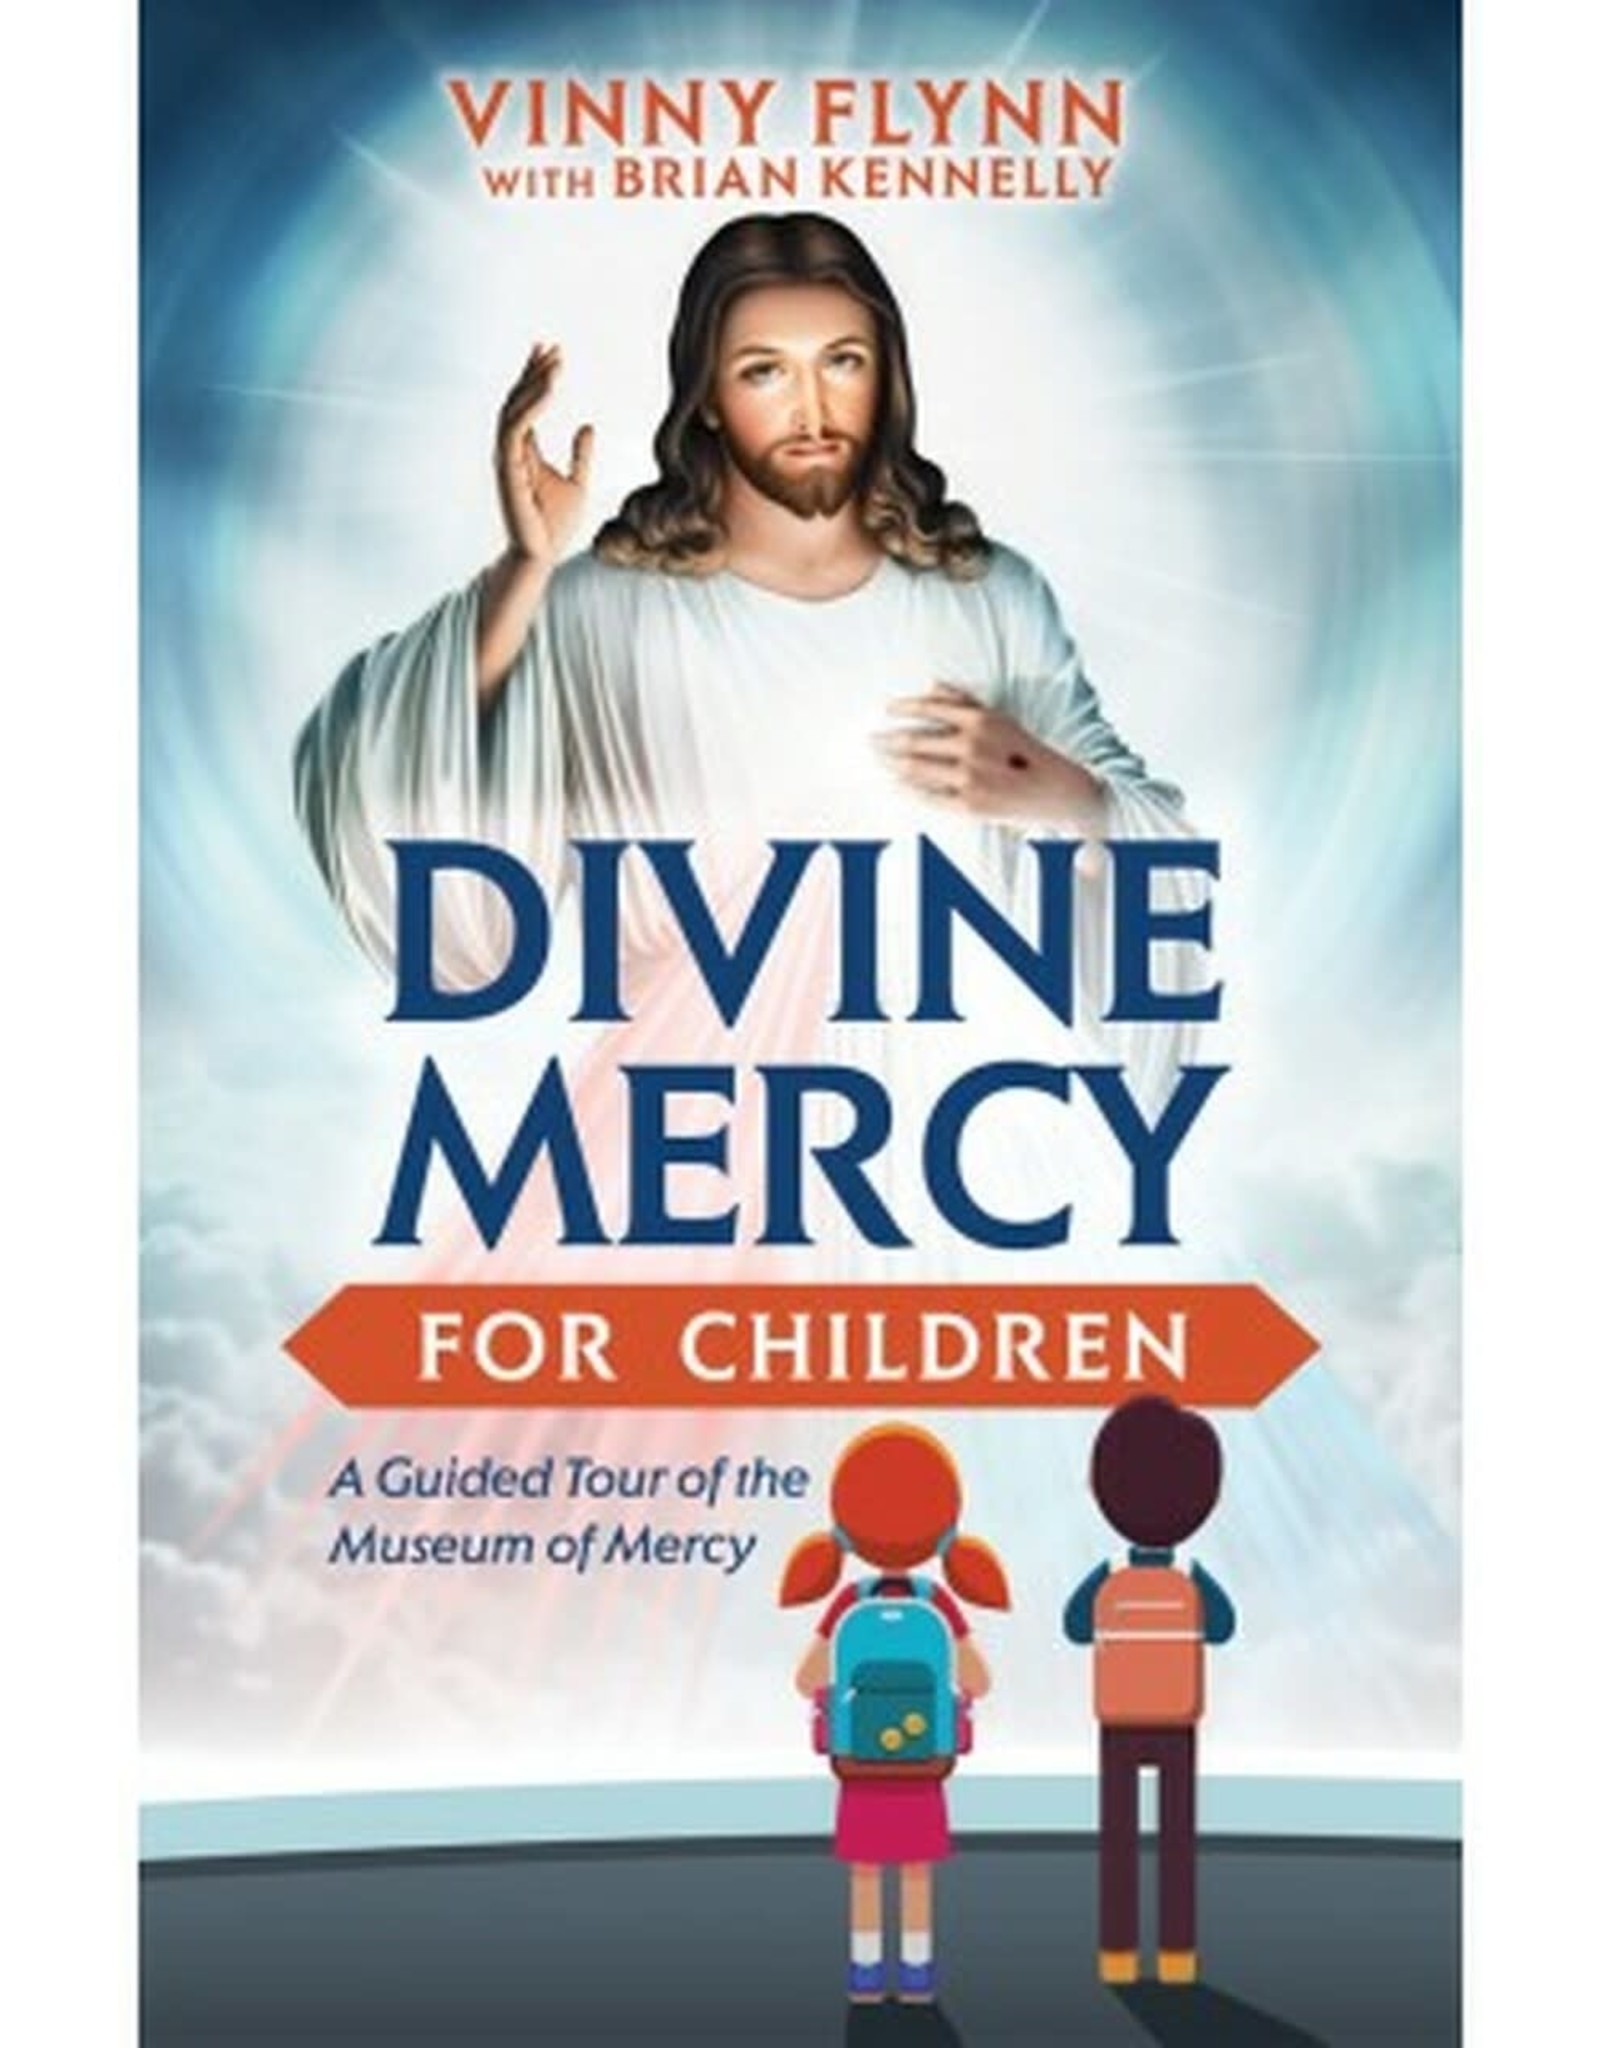 Divine Mercy for Children: A Guided Tour of the Museum of Mercy